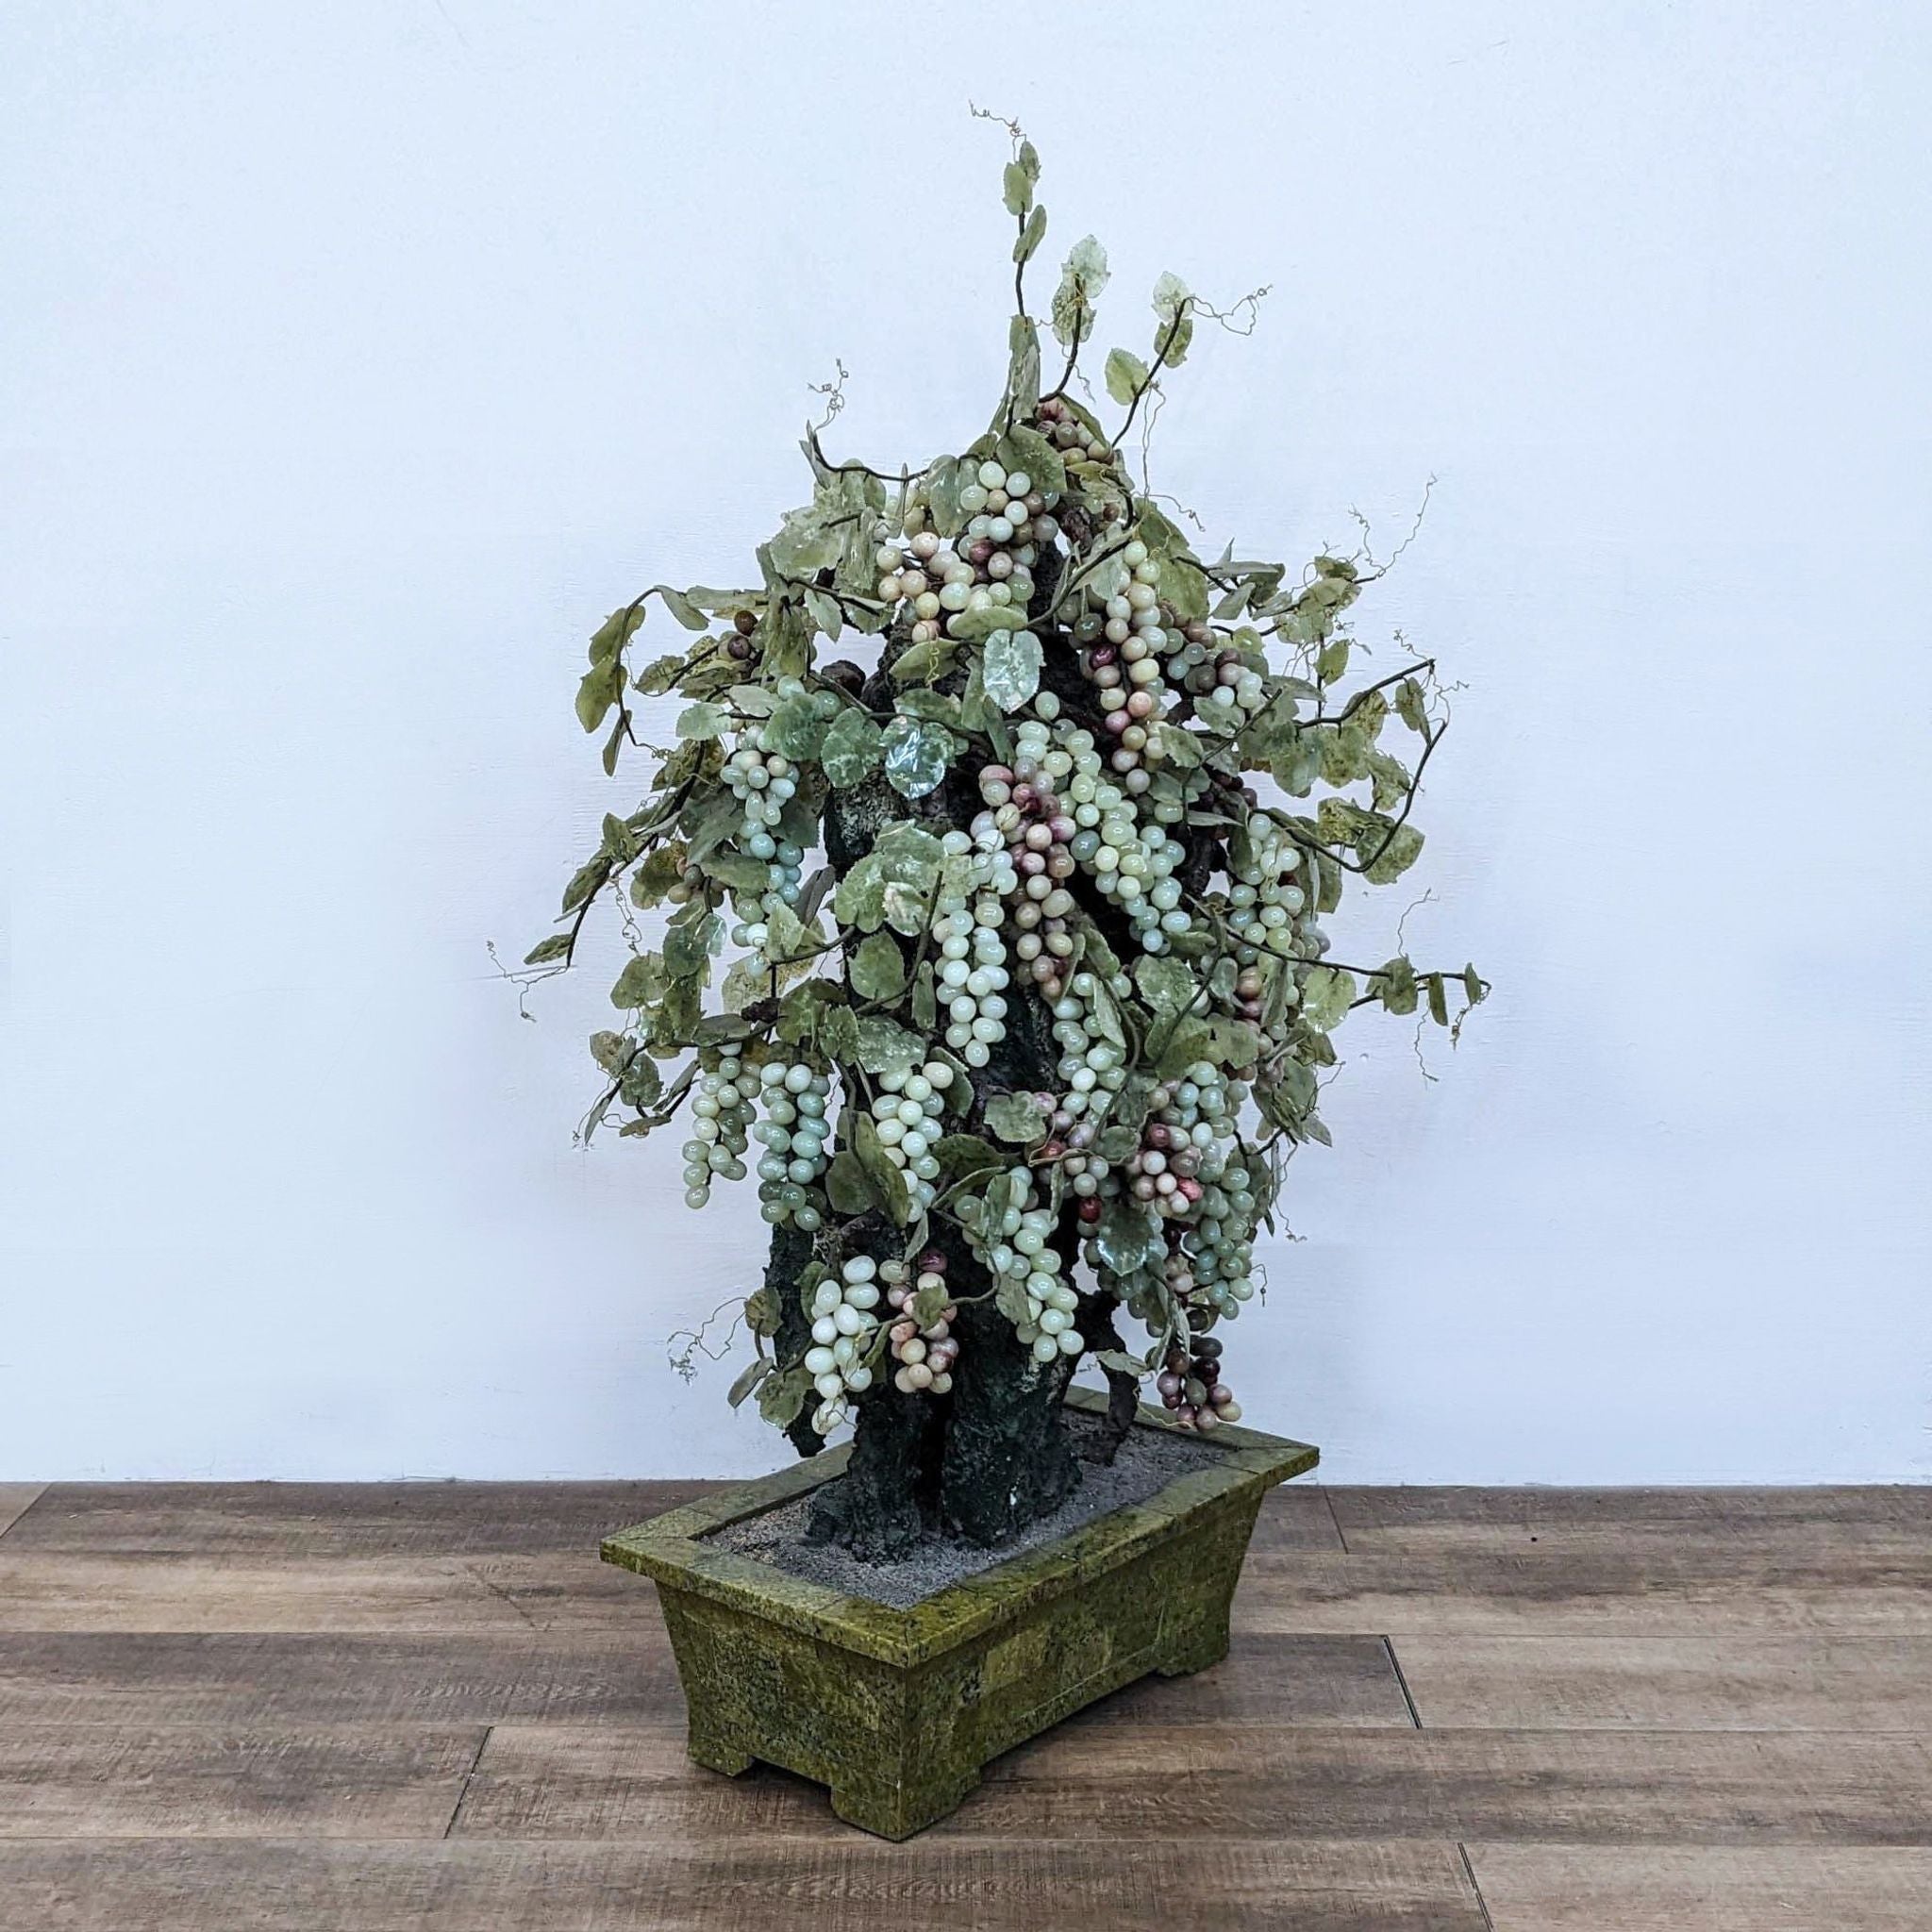 3. Full view of a tall artificial grapevine arrangement with abundant grape clusters, situated in a textured green square planter.